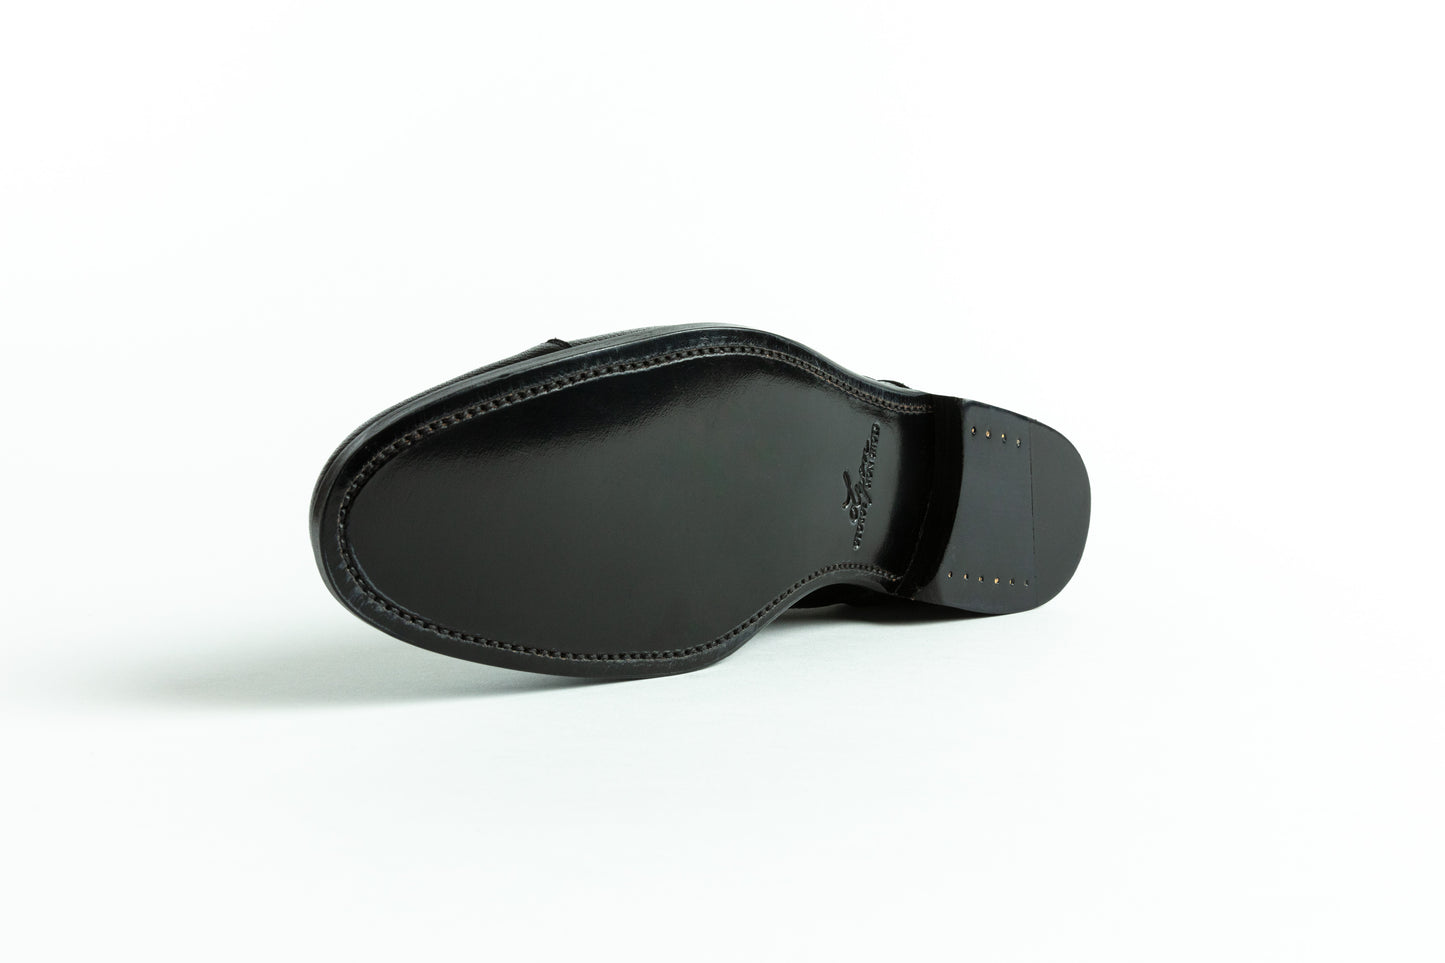 The James Boot in Black with Matching Belt